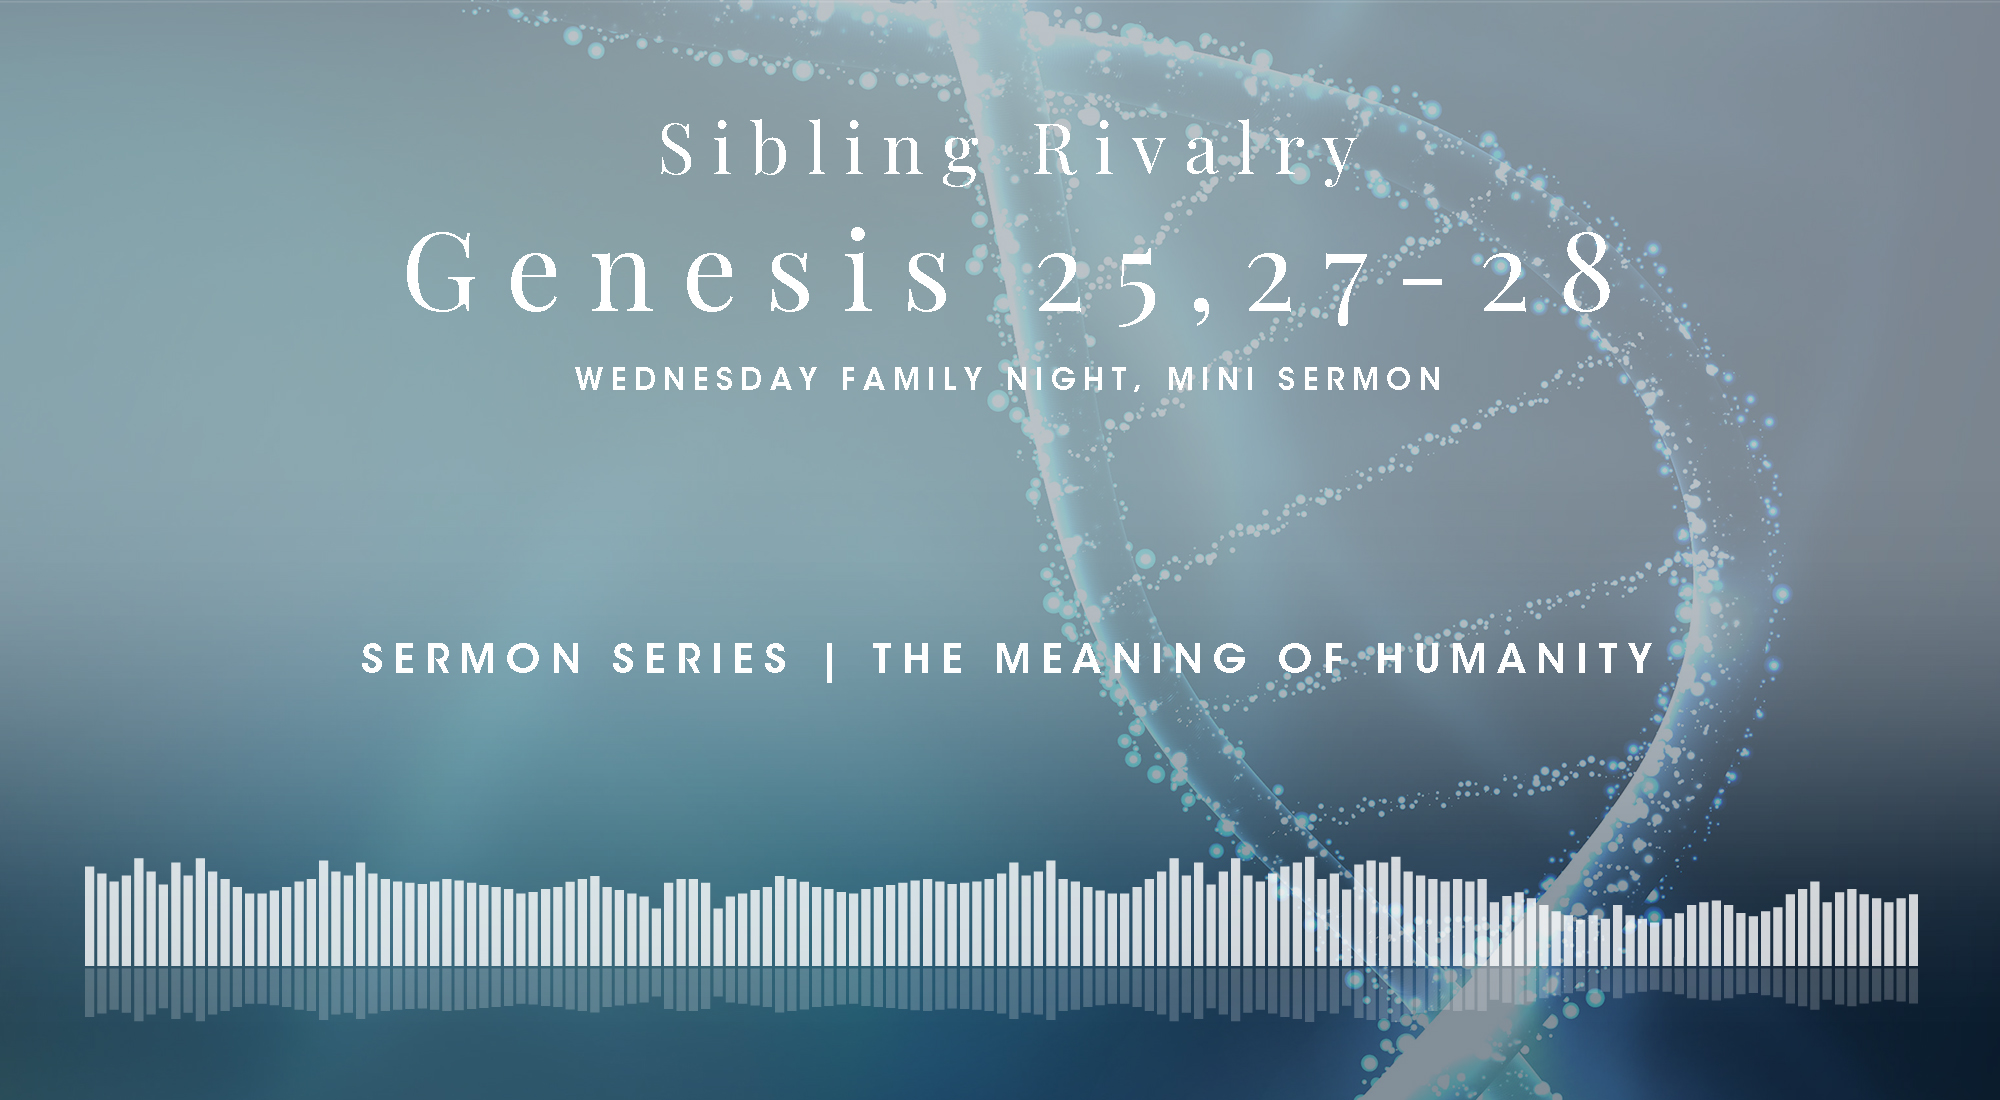 A Mini Bible Study in Genesis 25 & 27-28, From The Meaning of Humanity Sermon Series, Wyandotte County Christian Church Wednesday Family Night